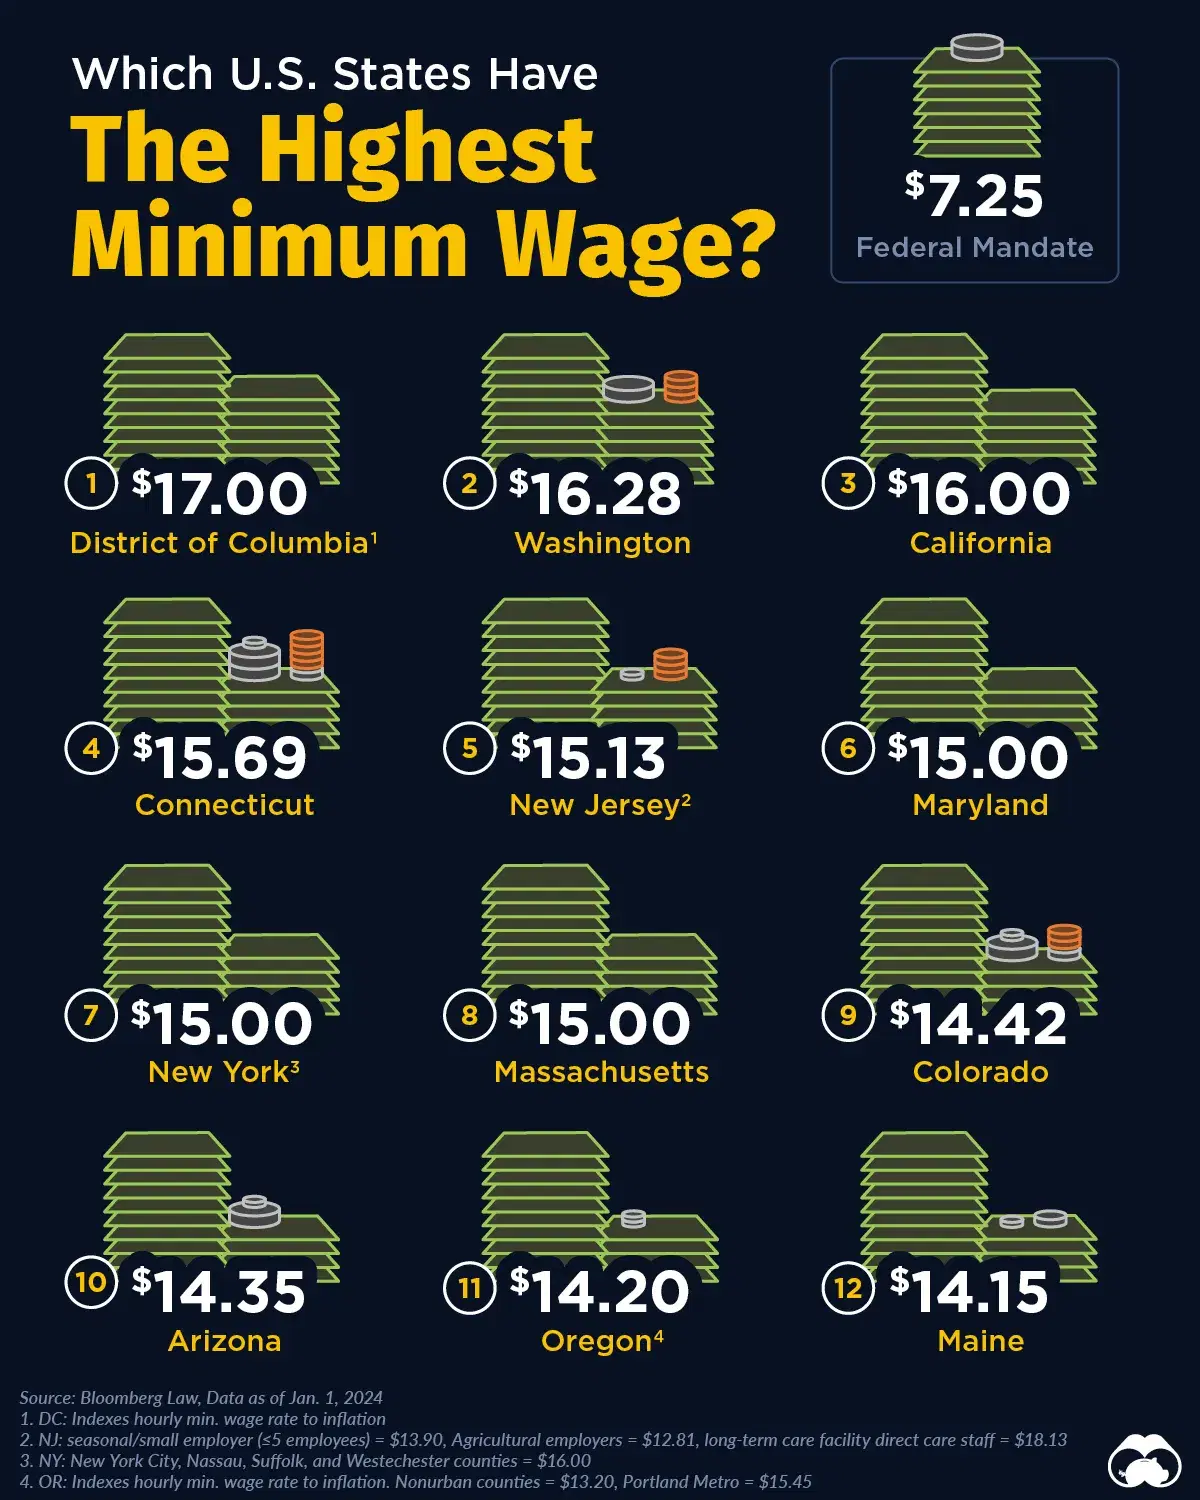 Which U.S. States Have the Highest Minimum Wage?